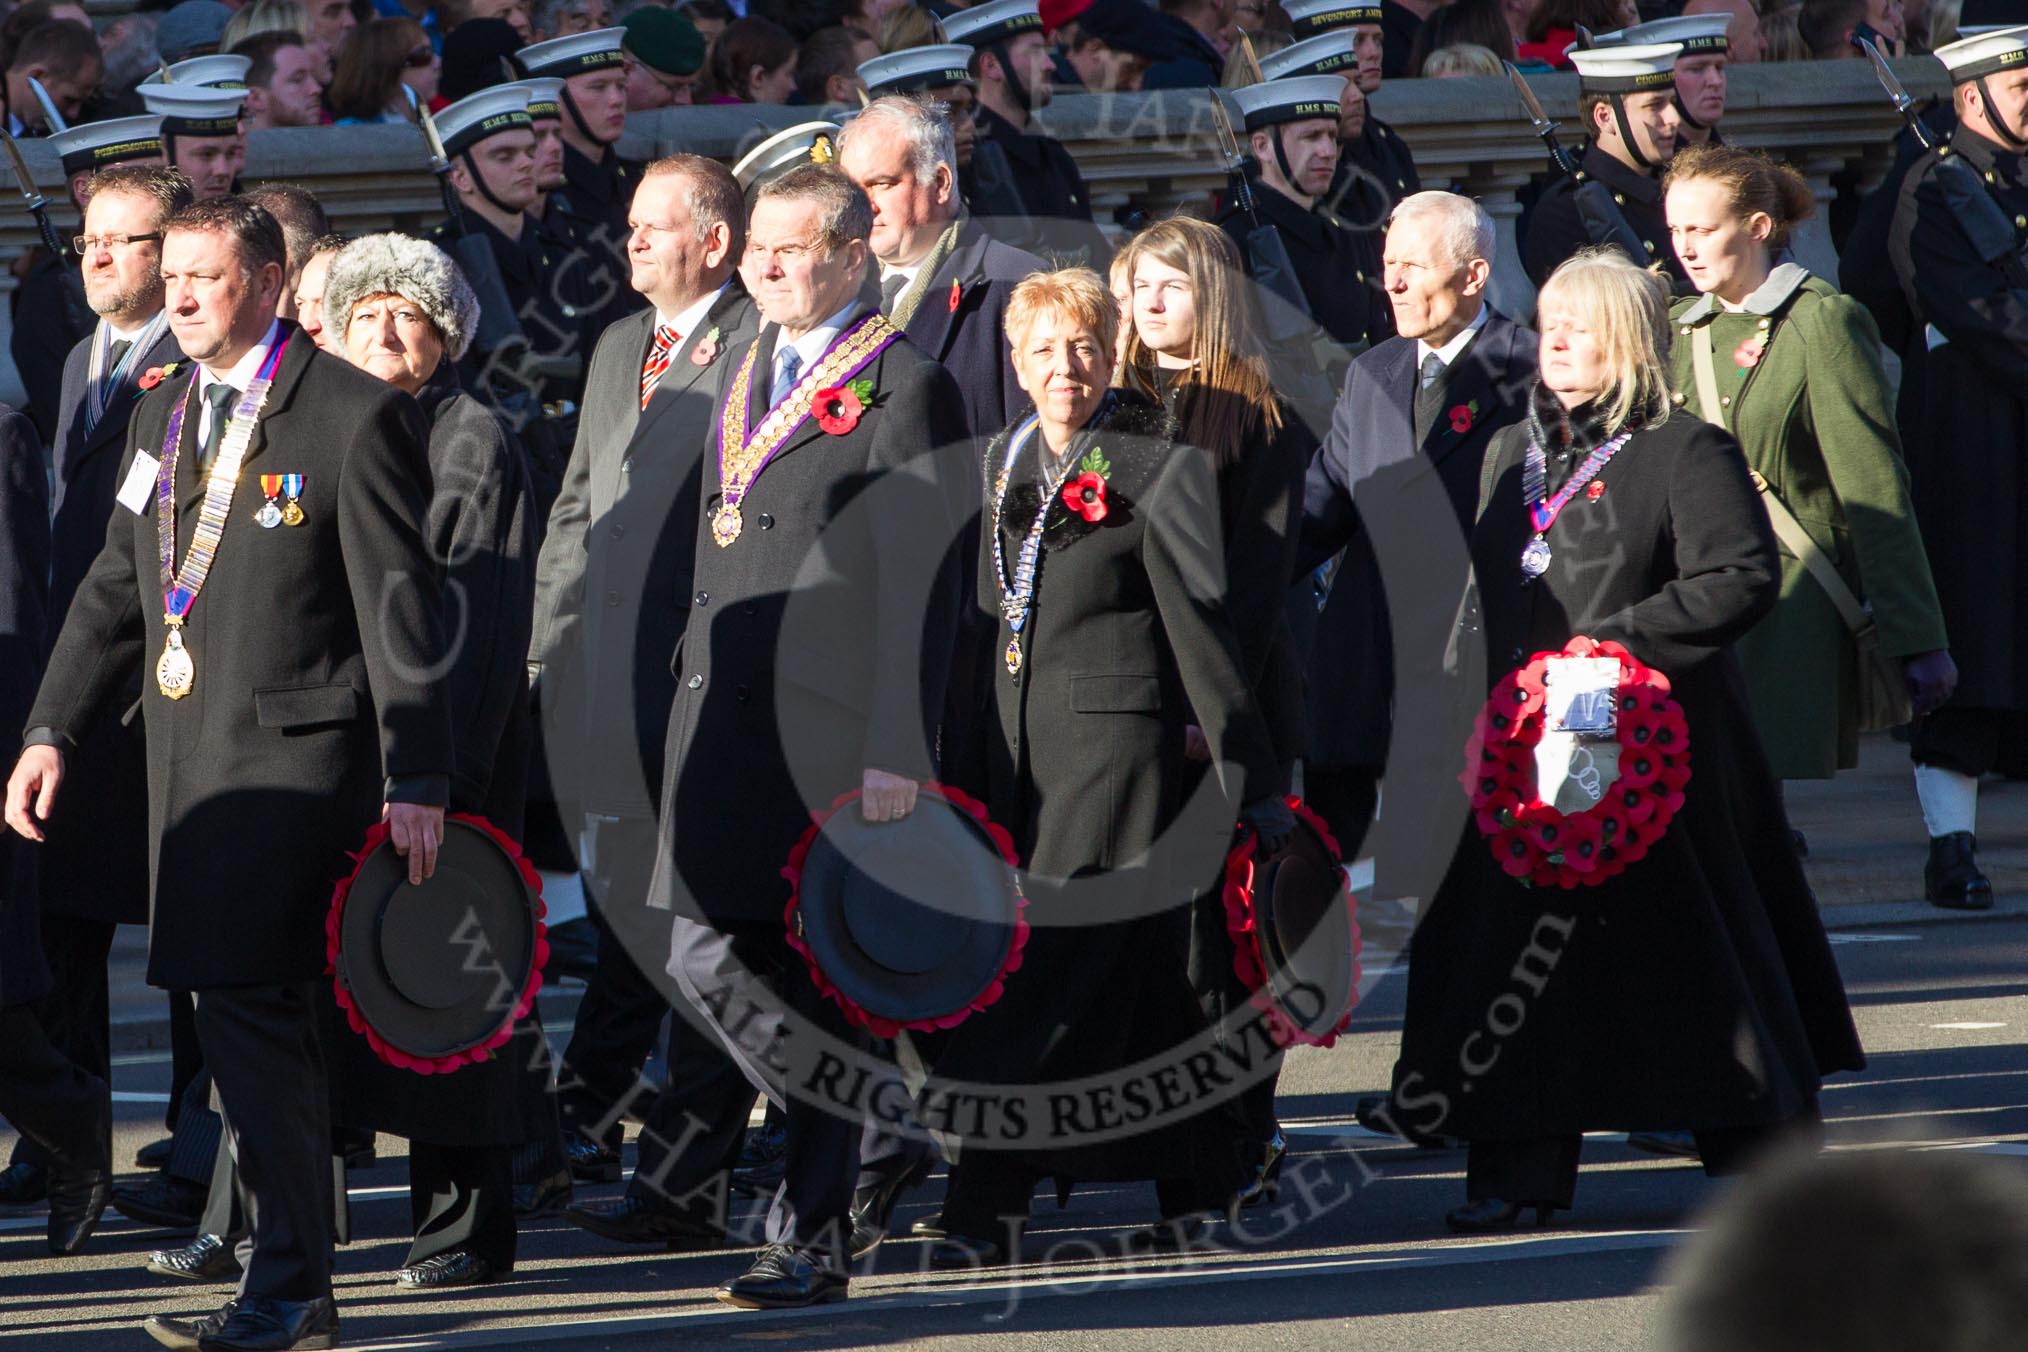 Remembrance Sunday 2012 Cenotaph March Past: Group M37 - Royal Antediluvian Order of Buffaloes and M38 - National Association of Round Tables..
Whitehall, Cenotaph,
London SW1,

United Kingdom,
on 11 November 2012 at 12:14, image #1650